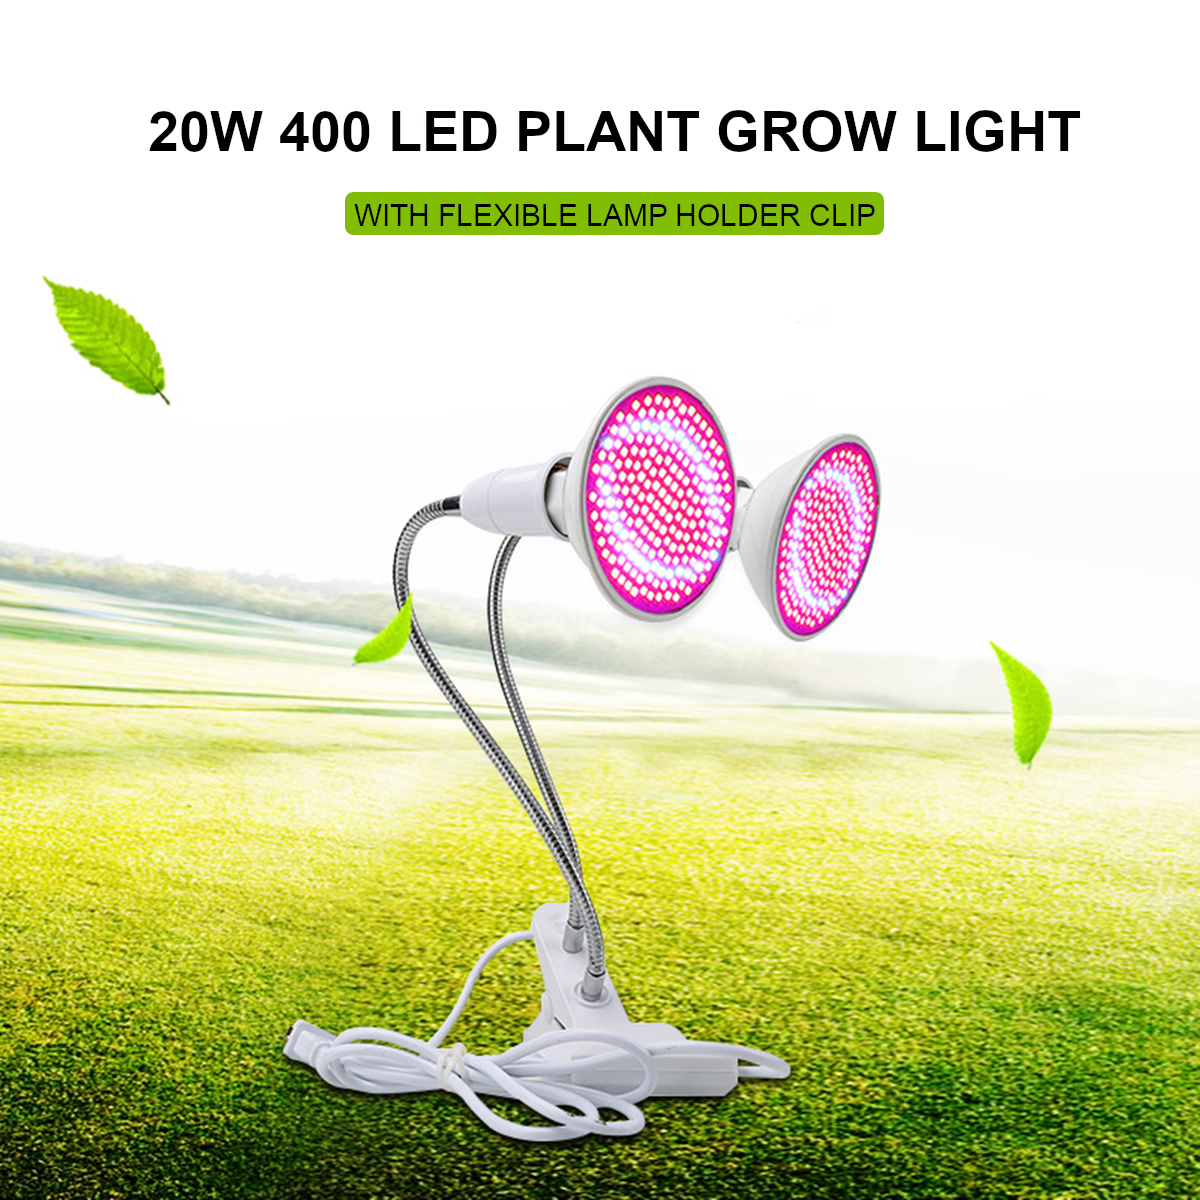 Dual-Heads-20W-LED-Plant-Grow-Light-with-Lamp-Holder-Clip-For-Home-Indoor-Vegetable-Flowers-AC85-265-1723859-1